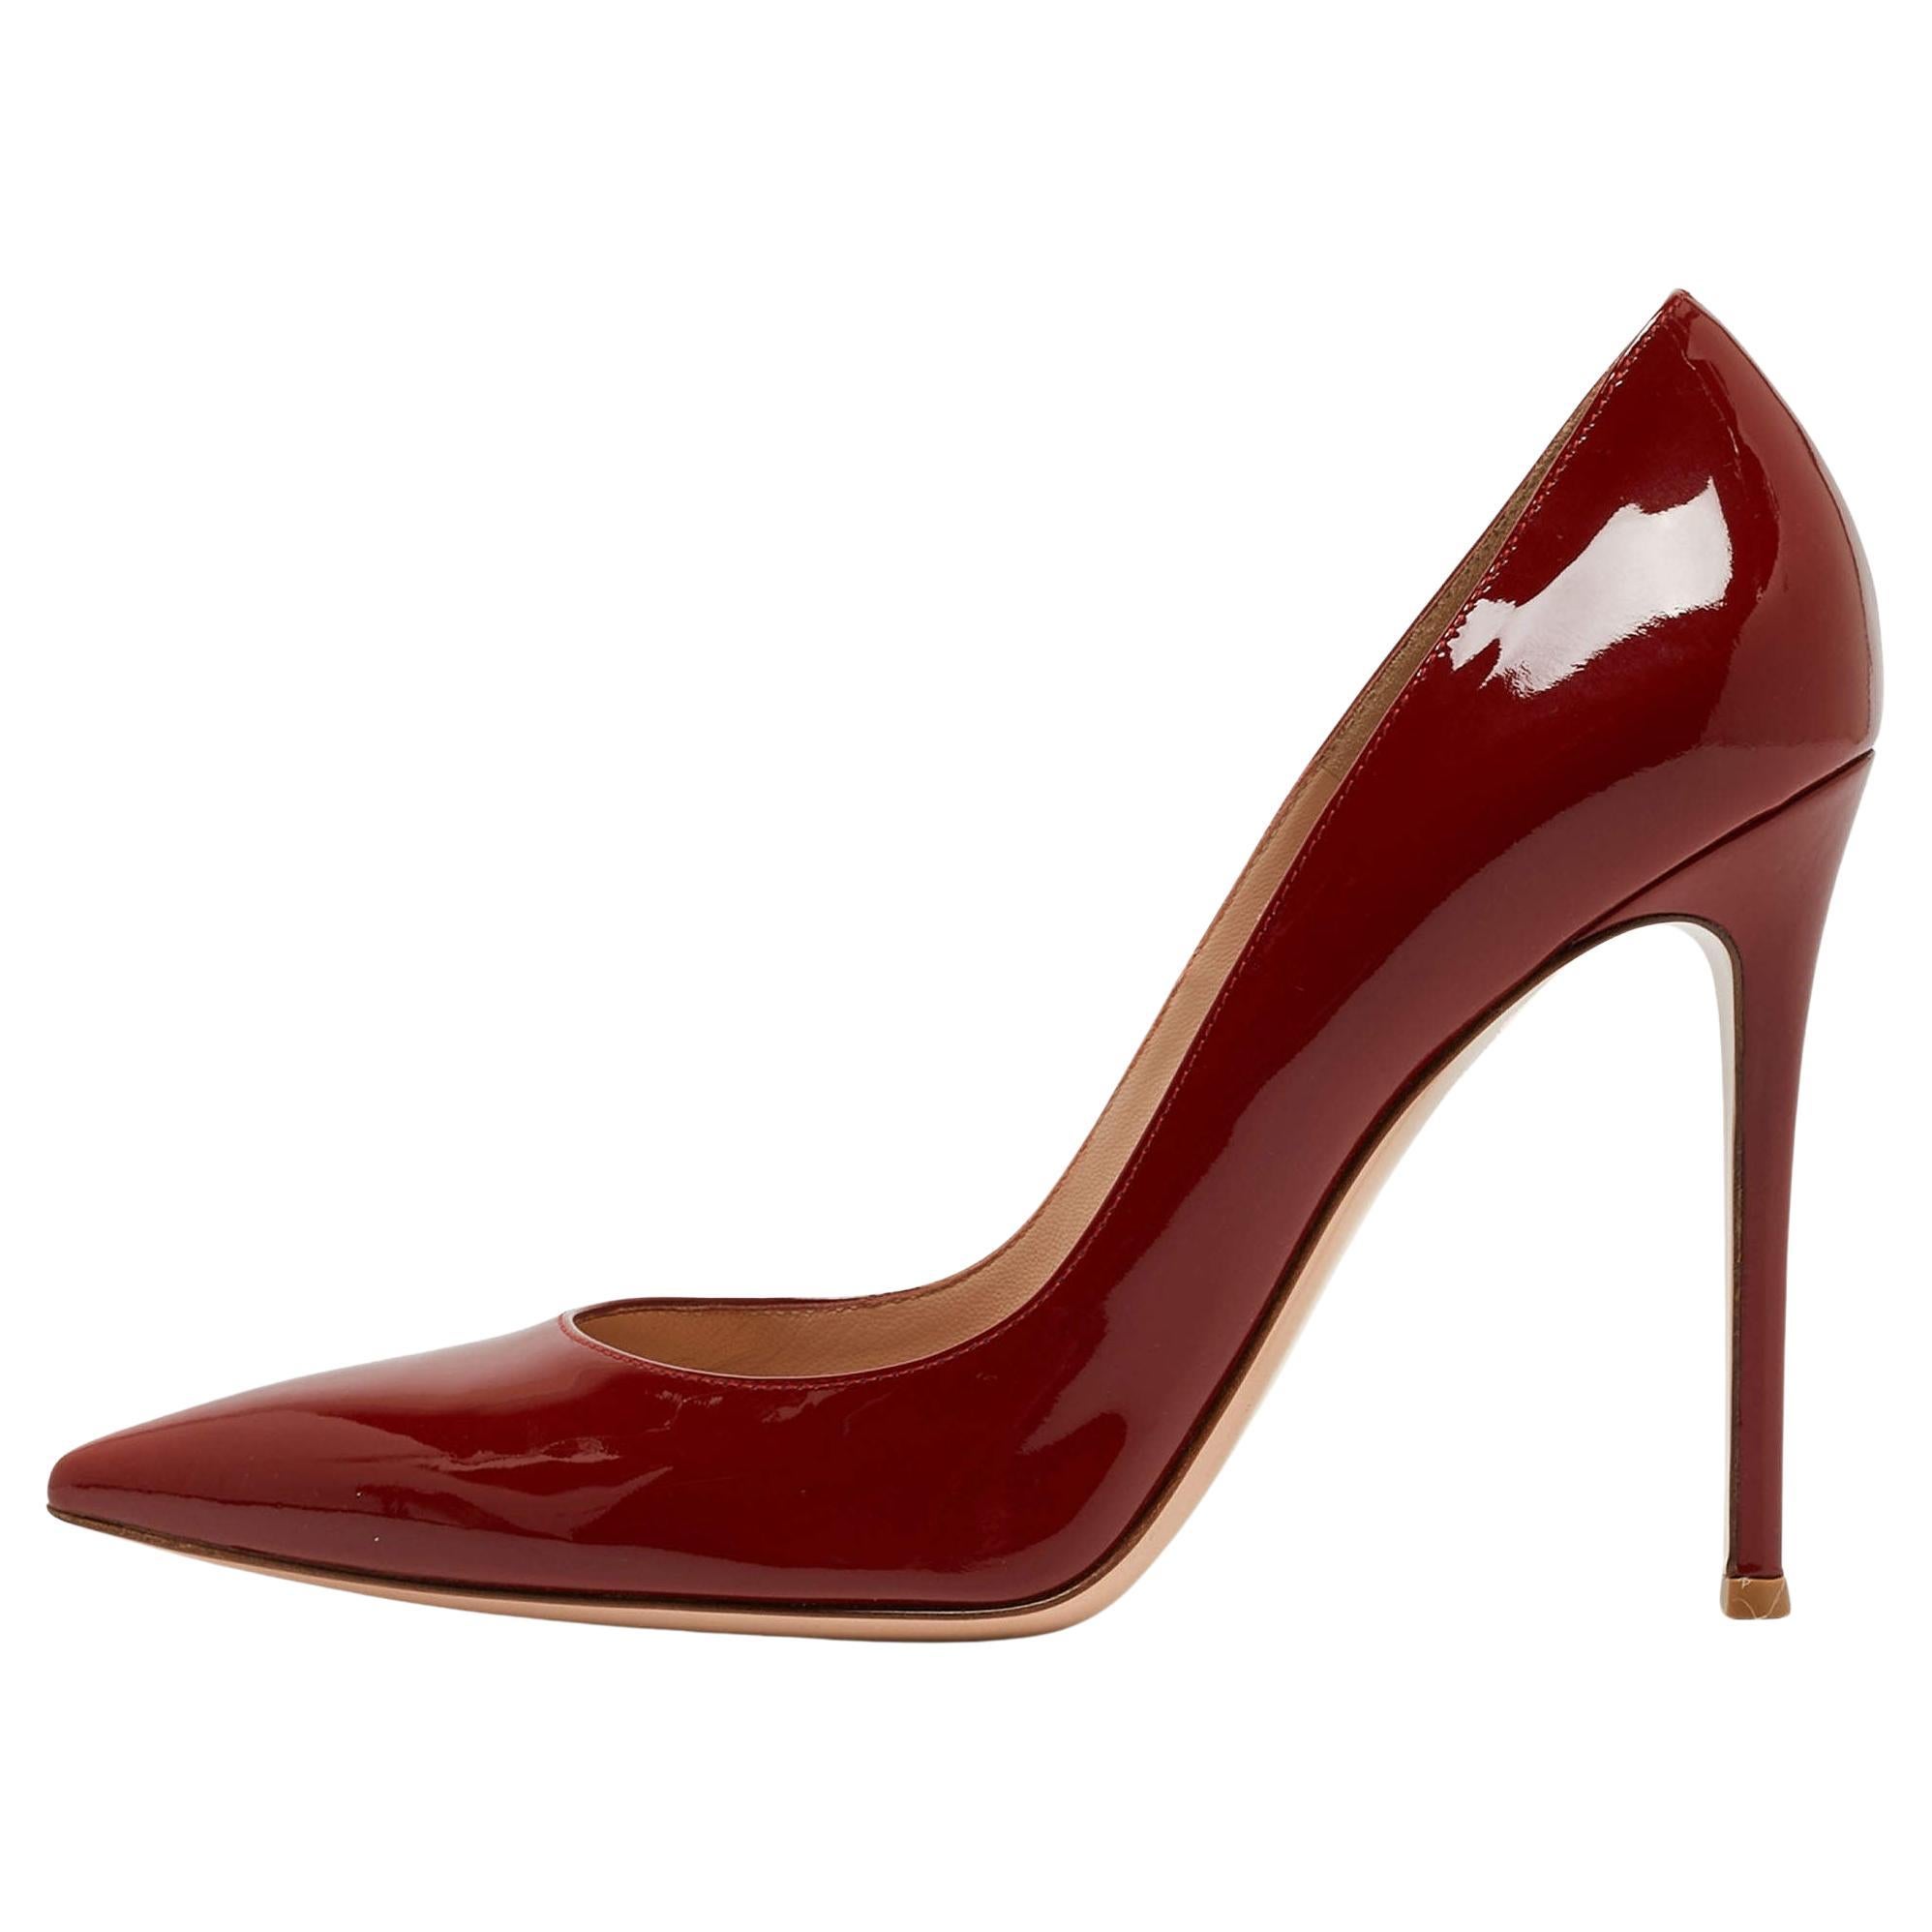 Gianvito Rossi Dark Red Patent Leather Pointed Toe Pumps Size 41 For Sale